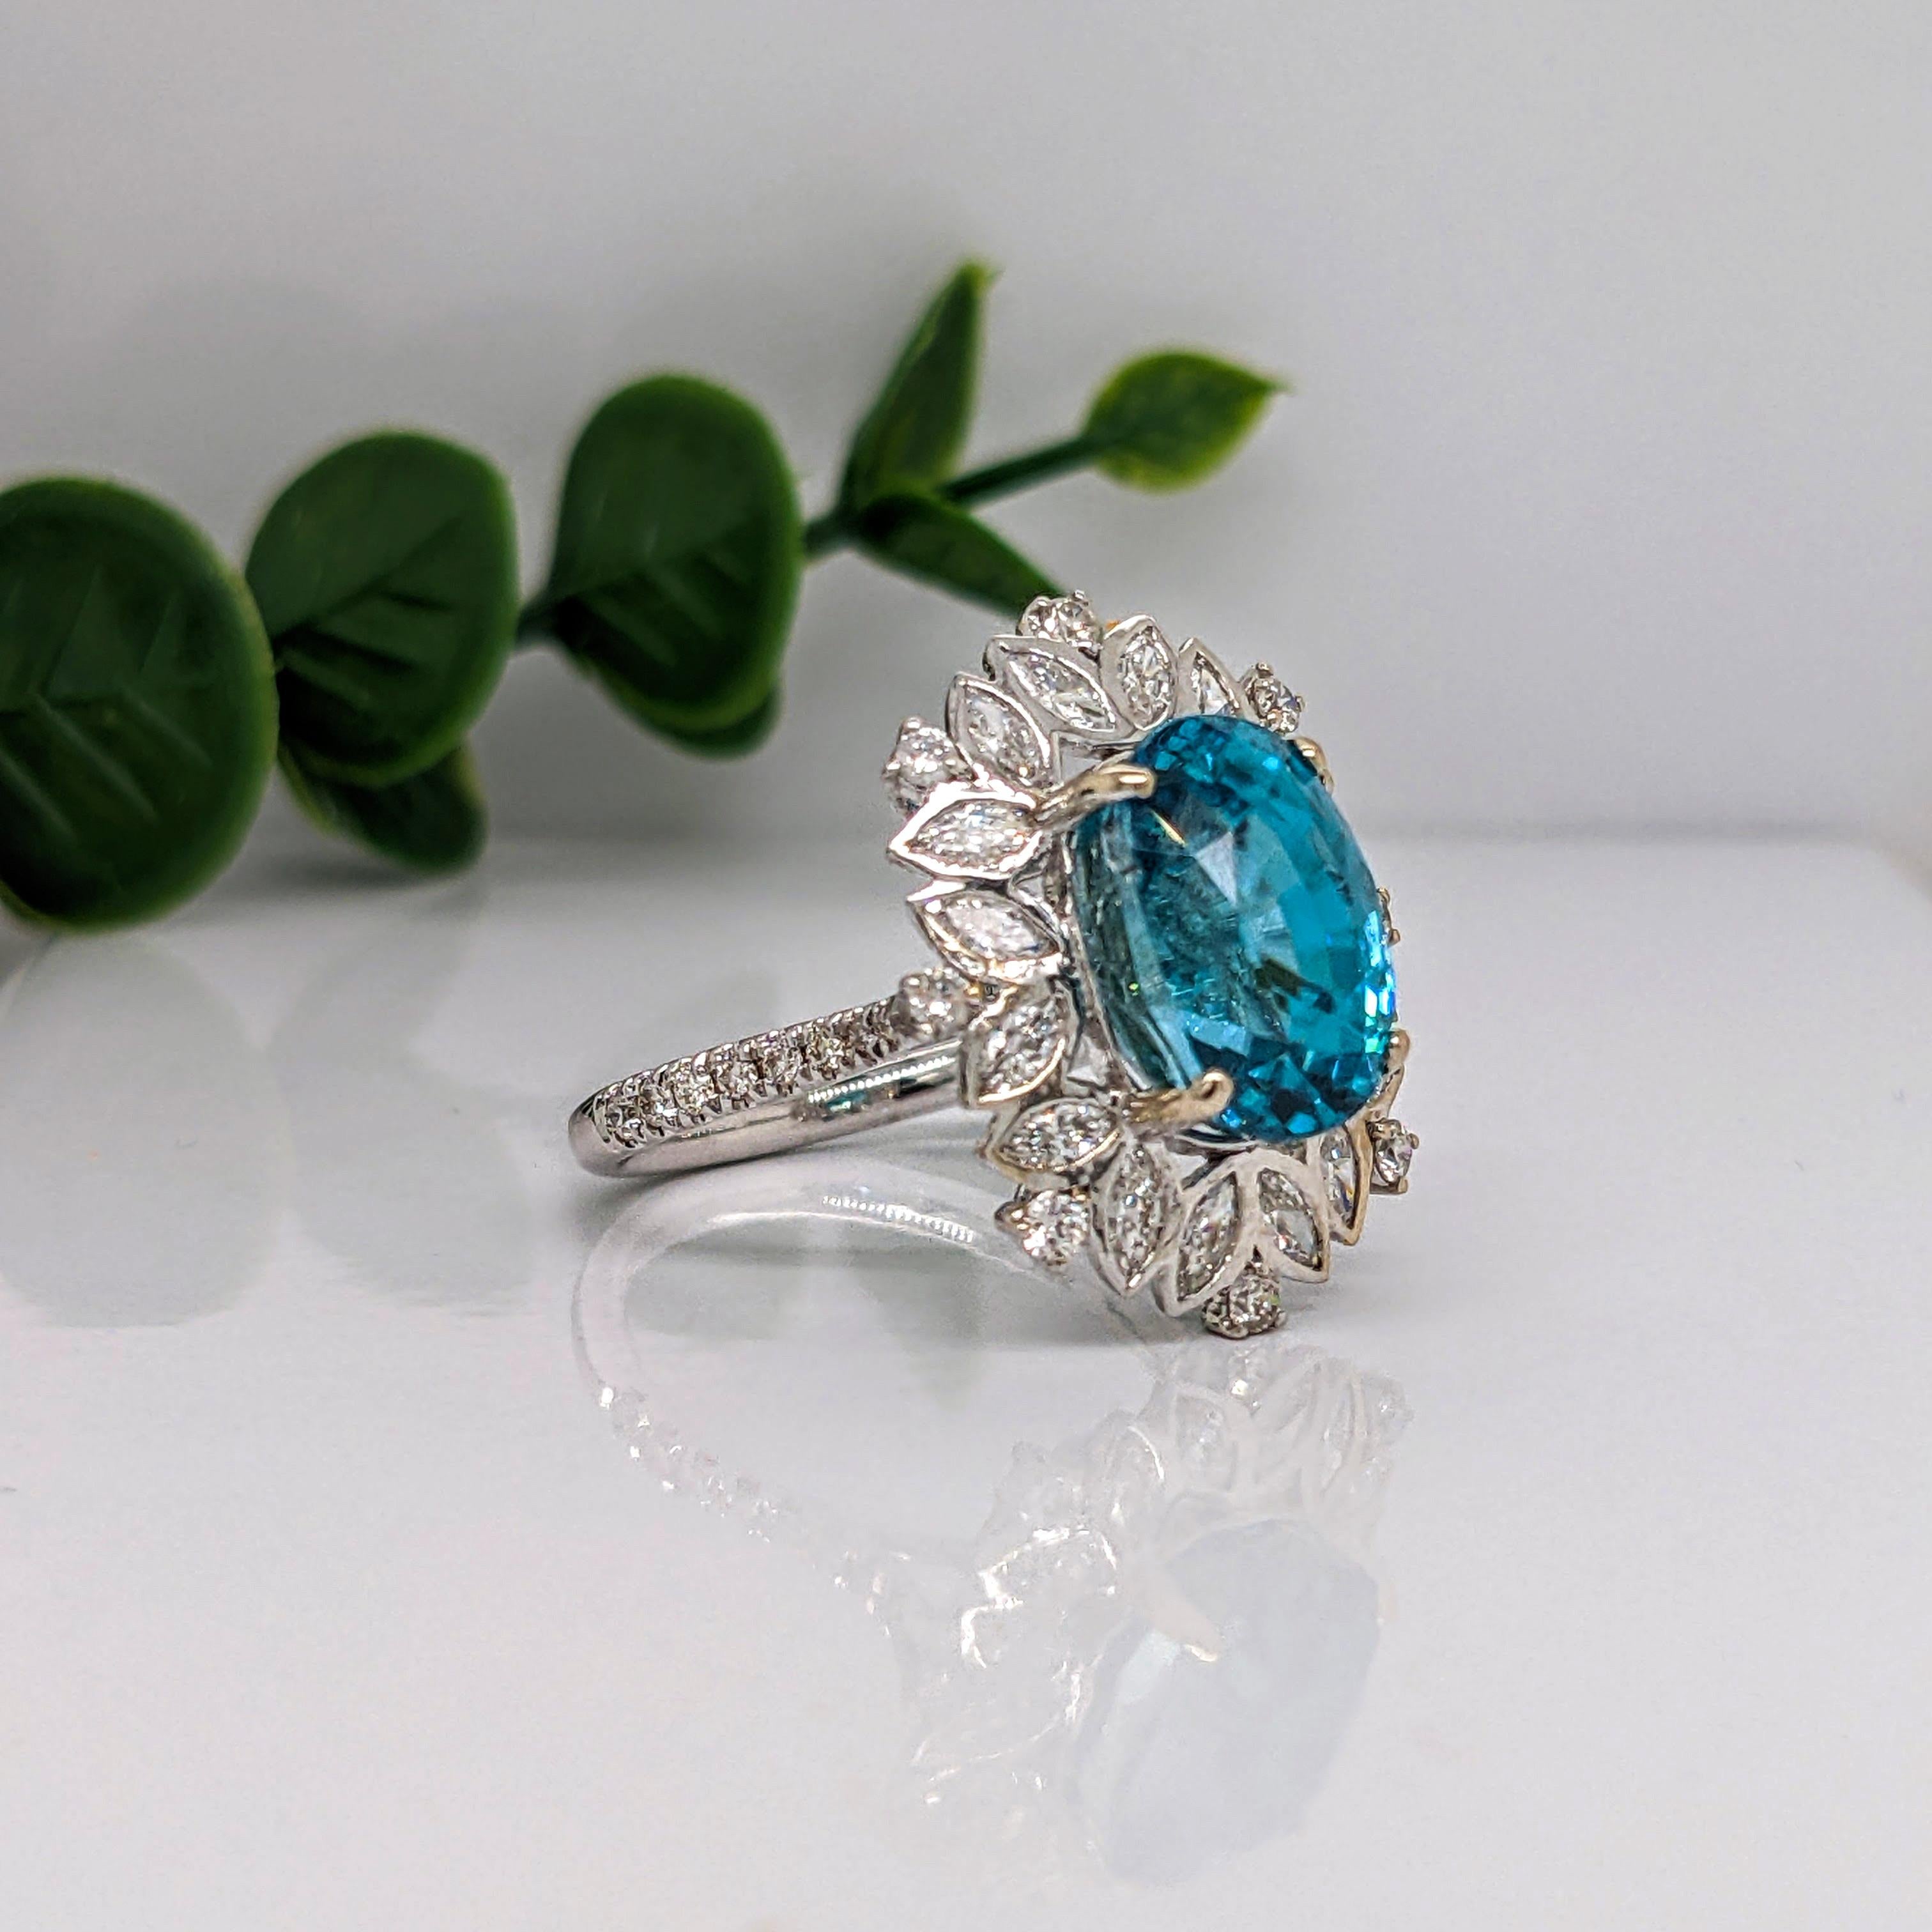 Oval Cut 9.5ct Blue Zircon Pavé Cocktail Ring in Solid 14K White Gold Oval